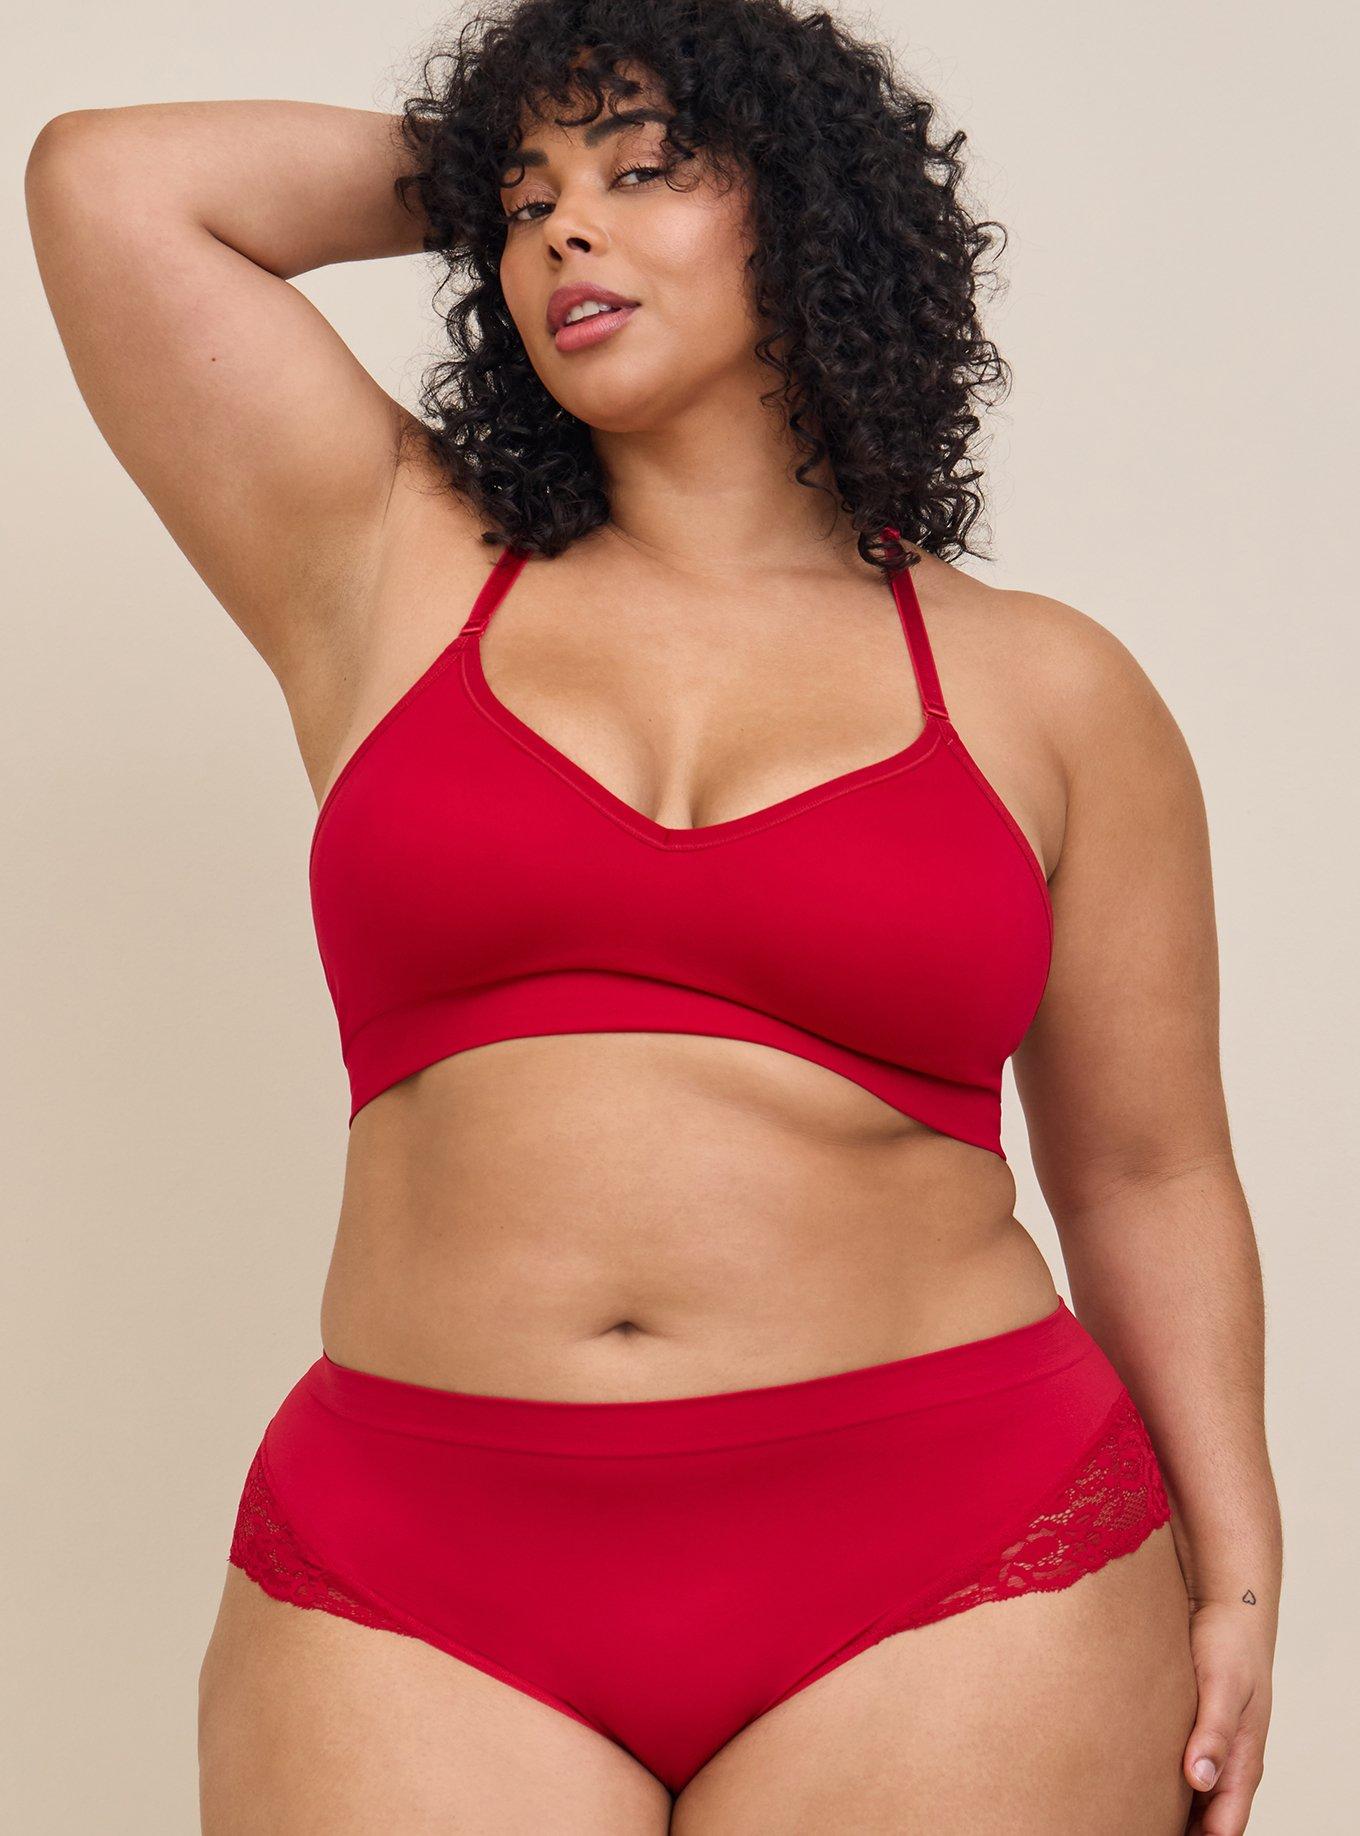 Plus Size - Seamless Smooth Mid-Rise Hipster Panty - Torrid